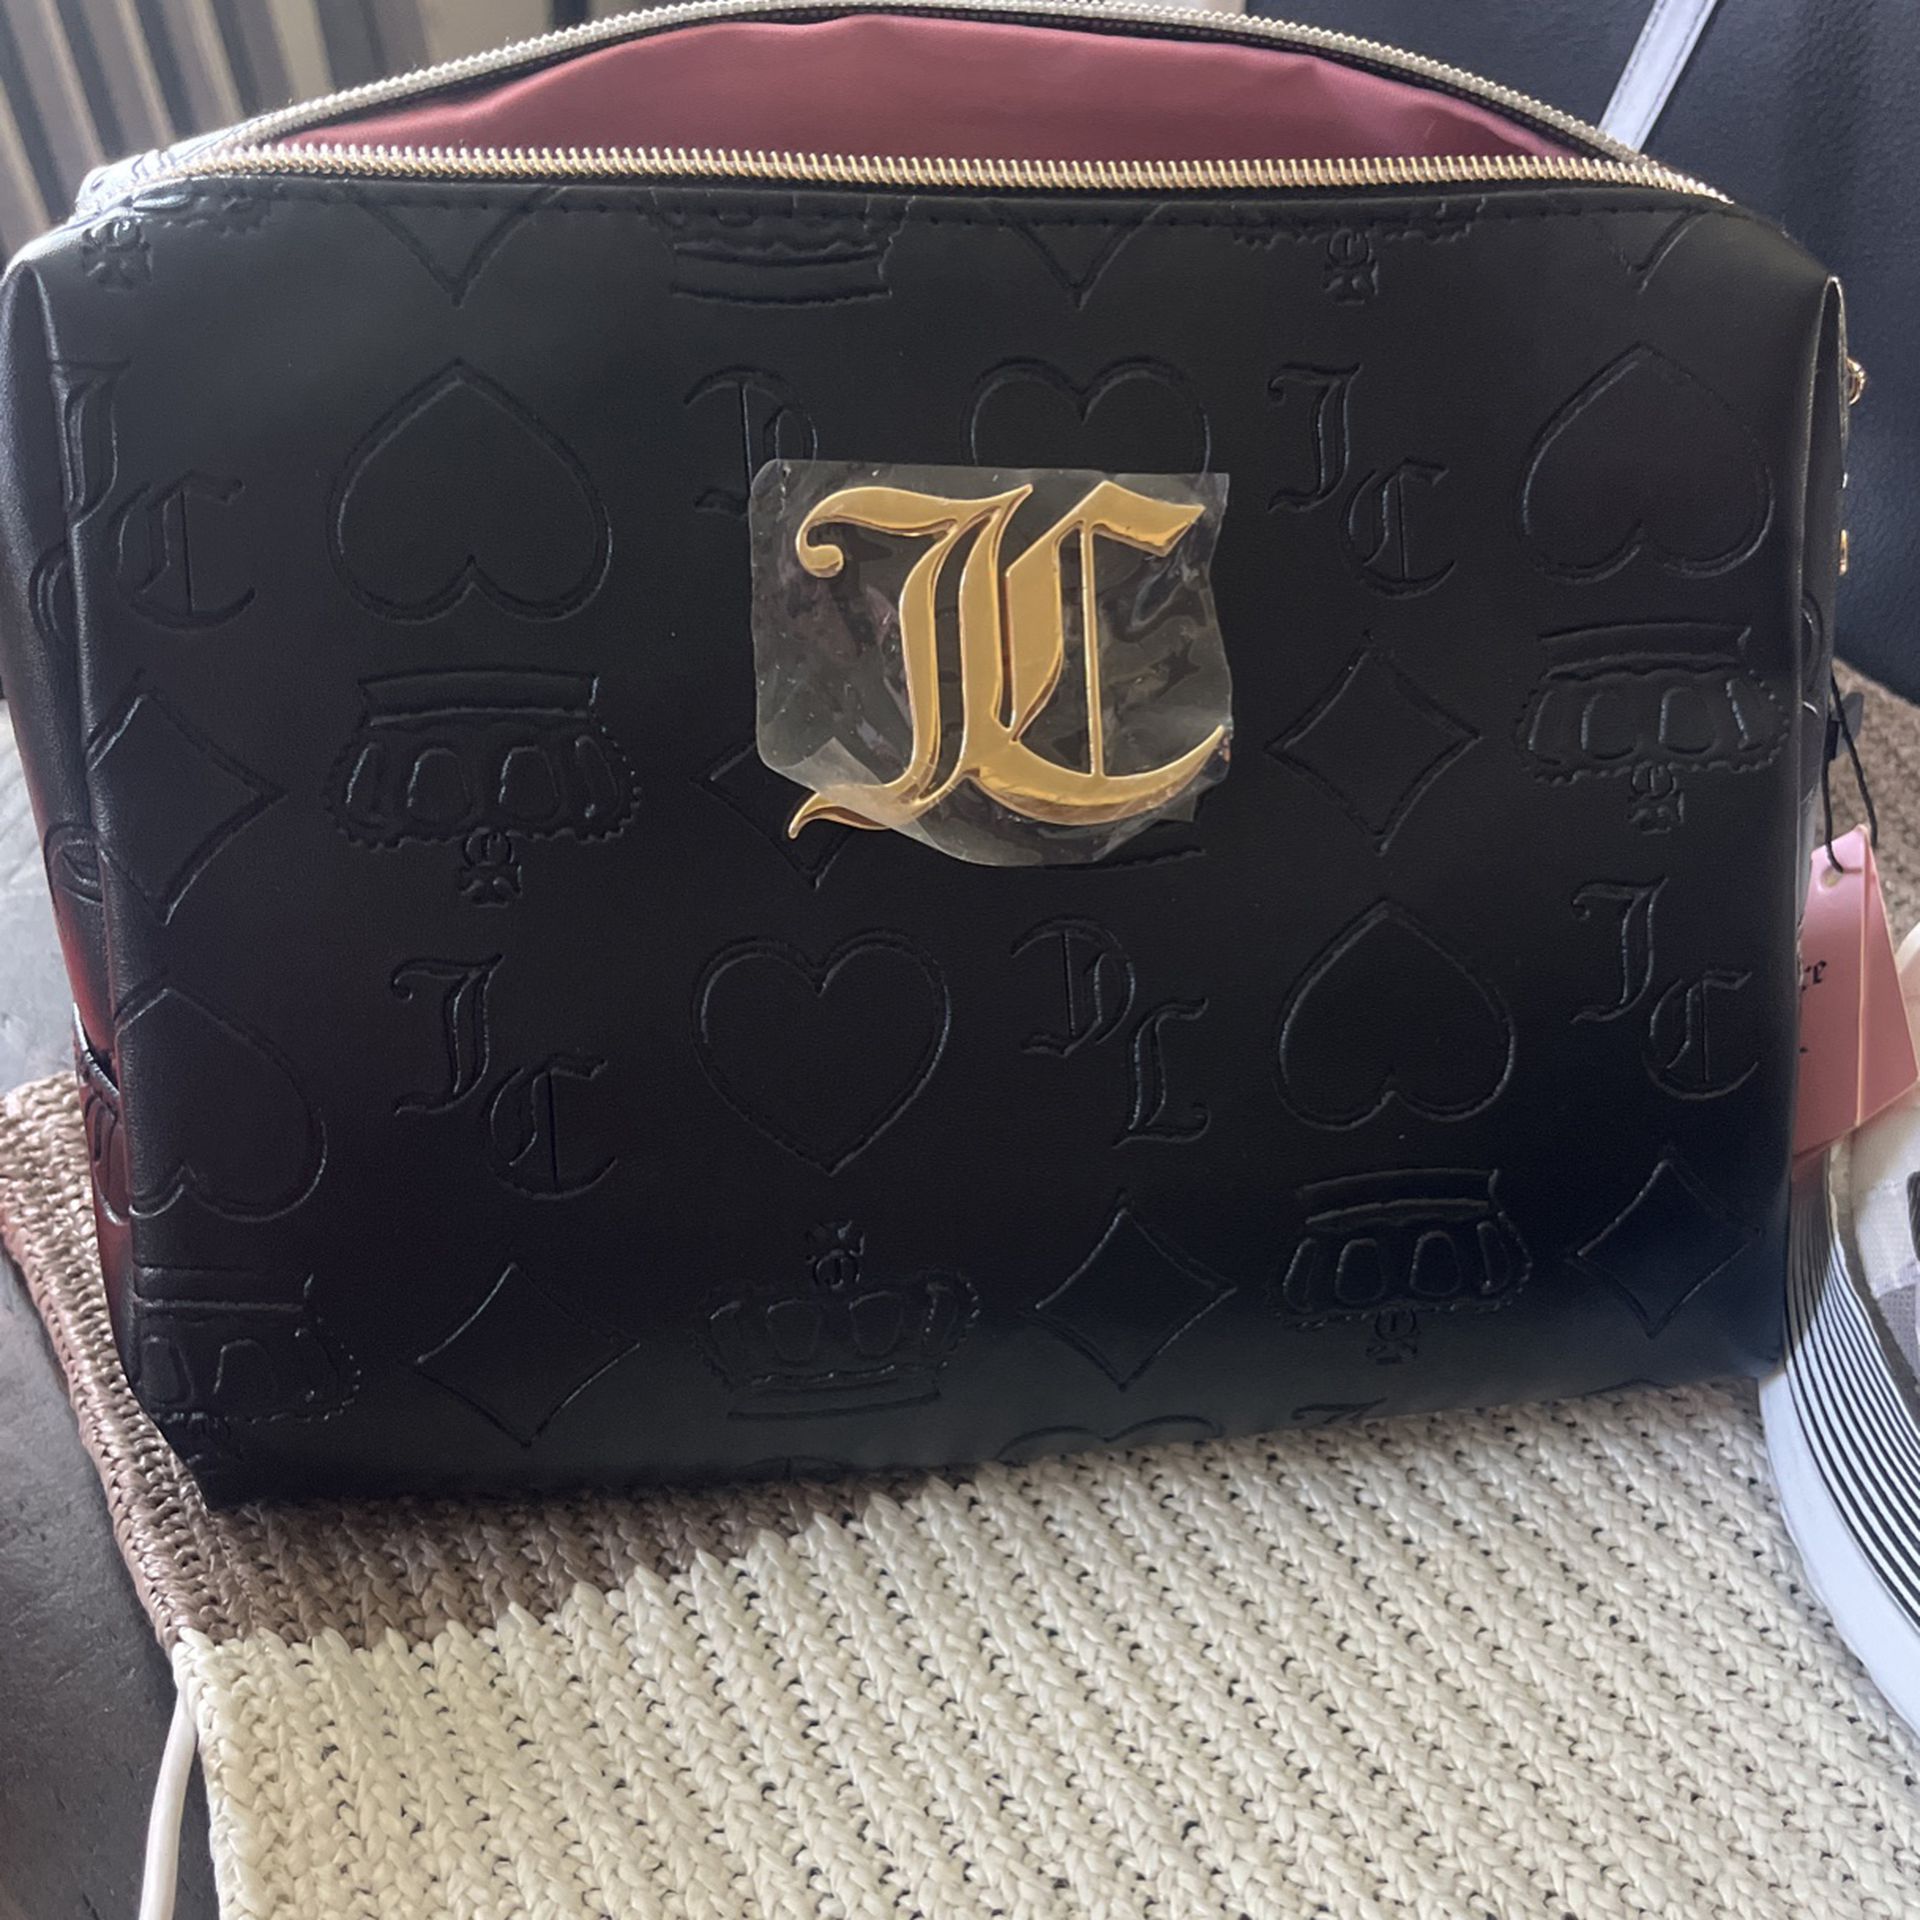 Juicy Couture Makeup Bag With Bottle